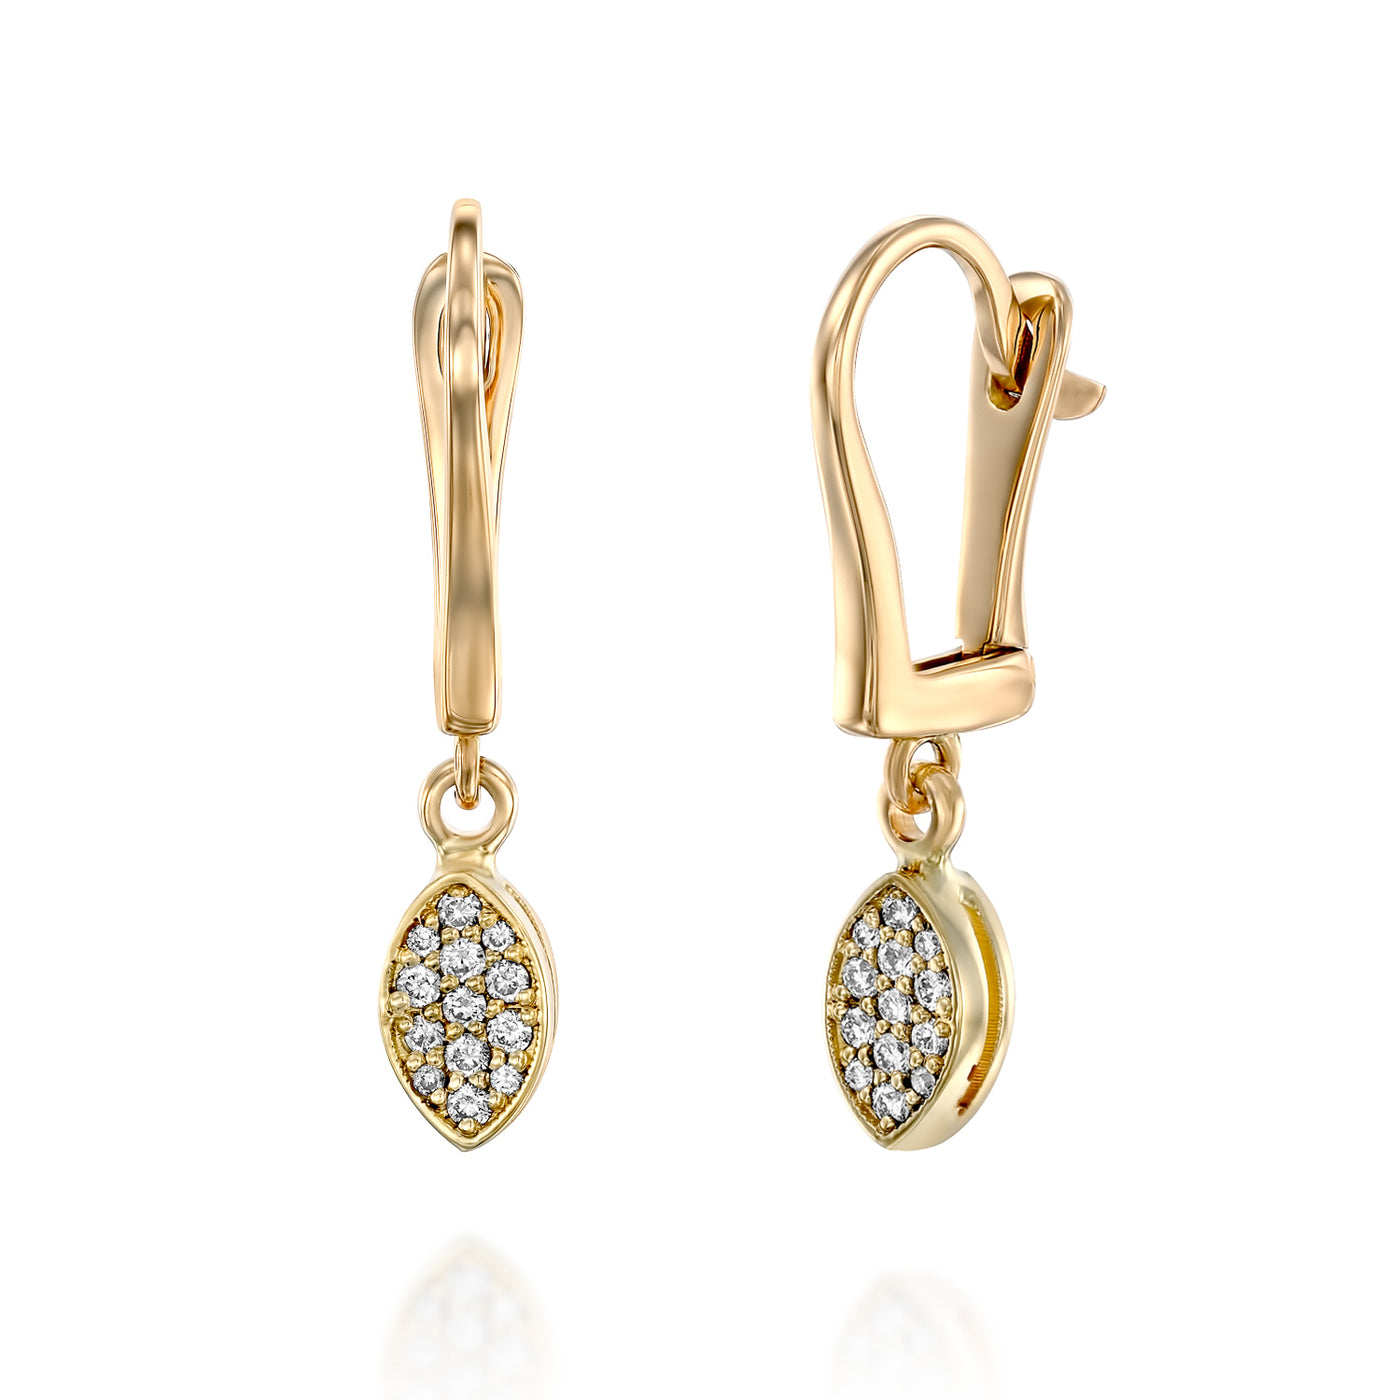 These minimalist solid 14K gold diamond charm dangle earrings are the perfect bridal marquise solid gold drop earrings.